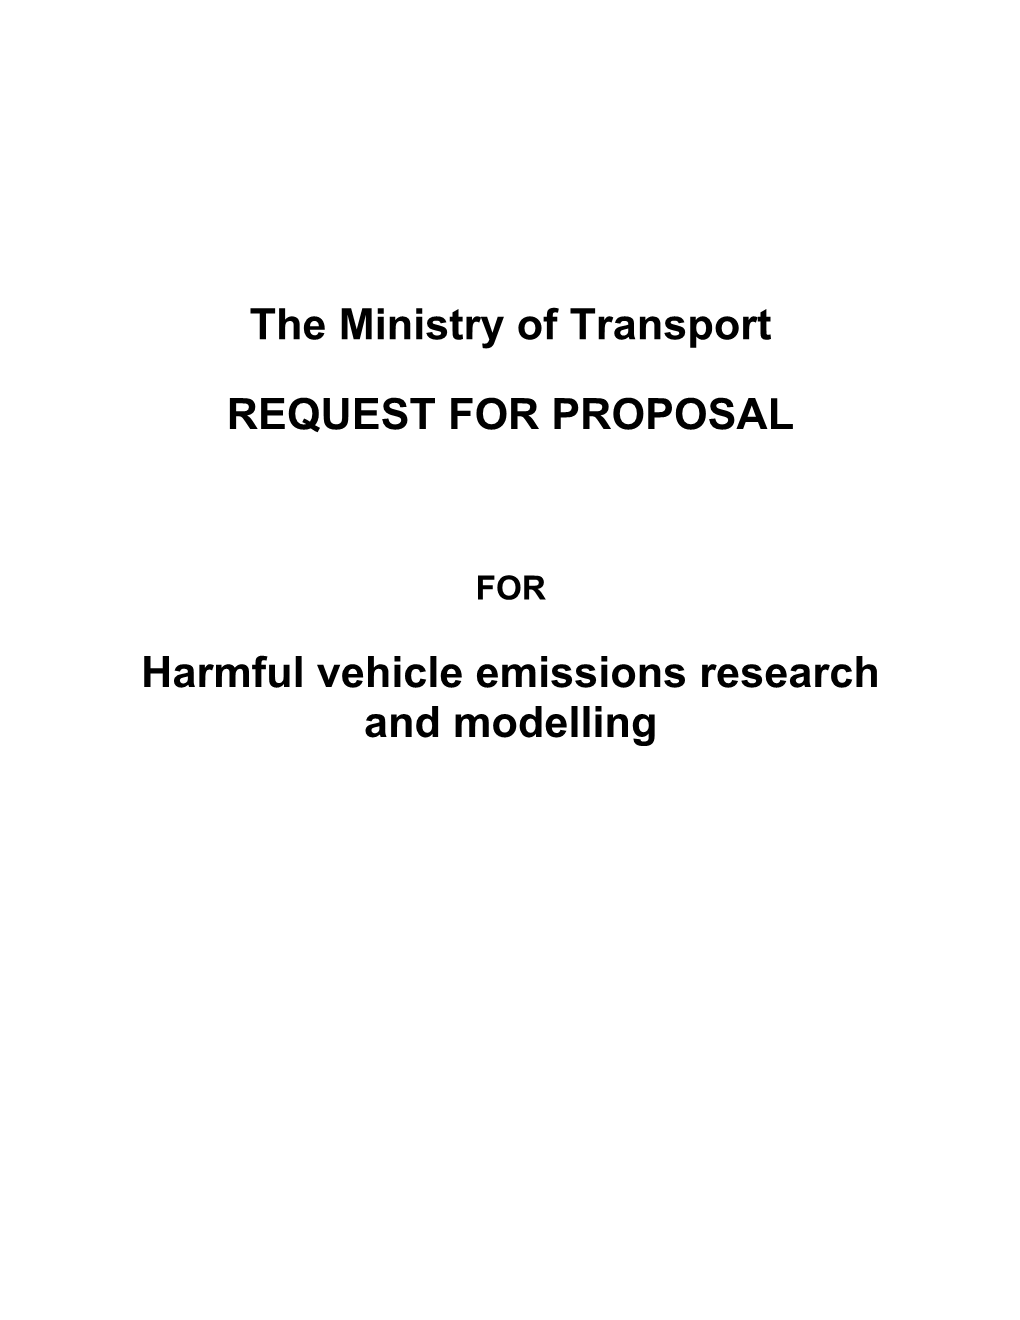 RFP for Harmful Vehicle Emissions Research and Modelling